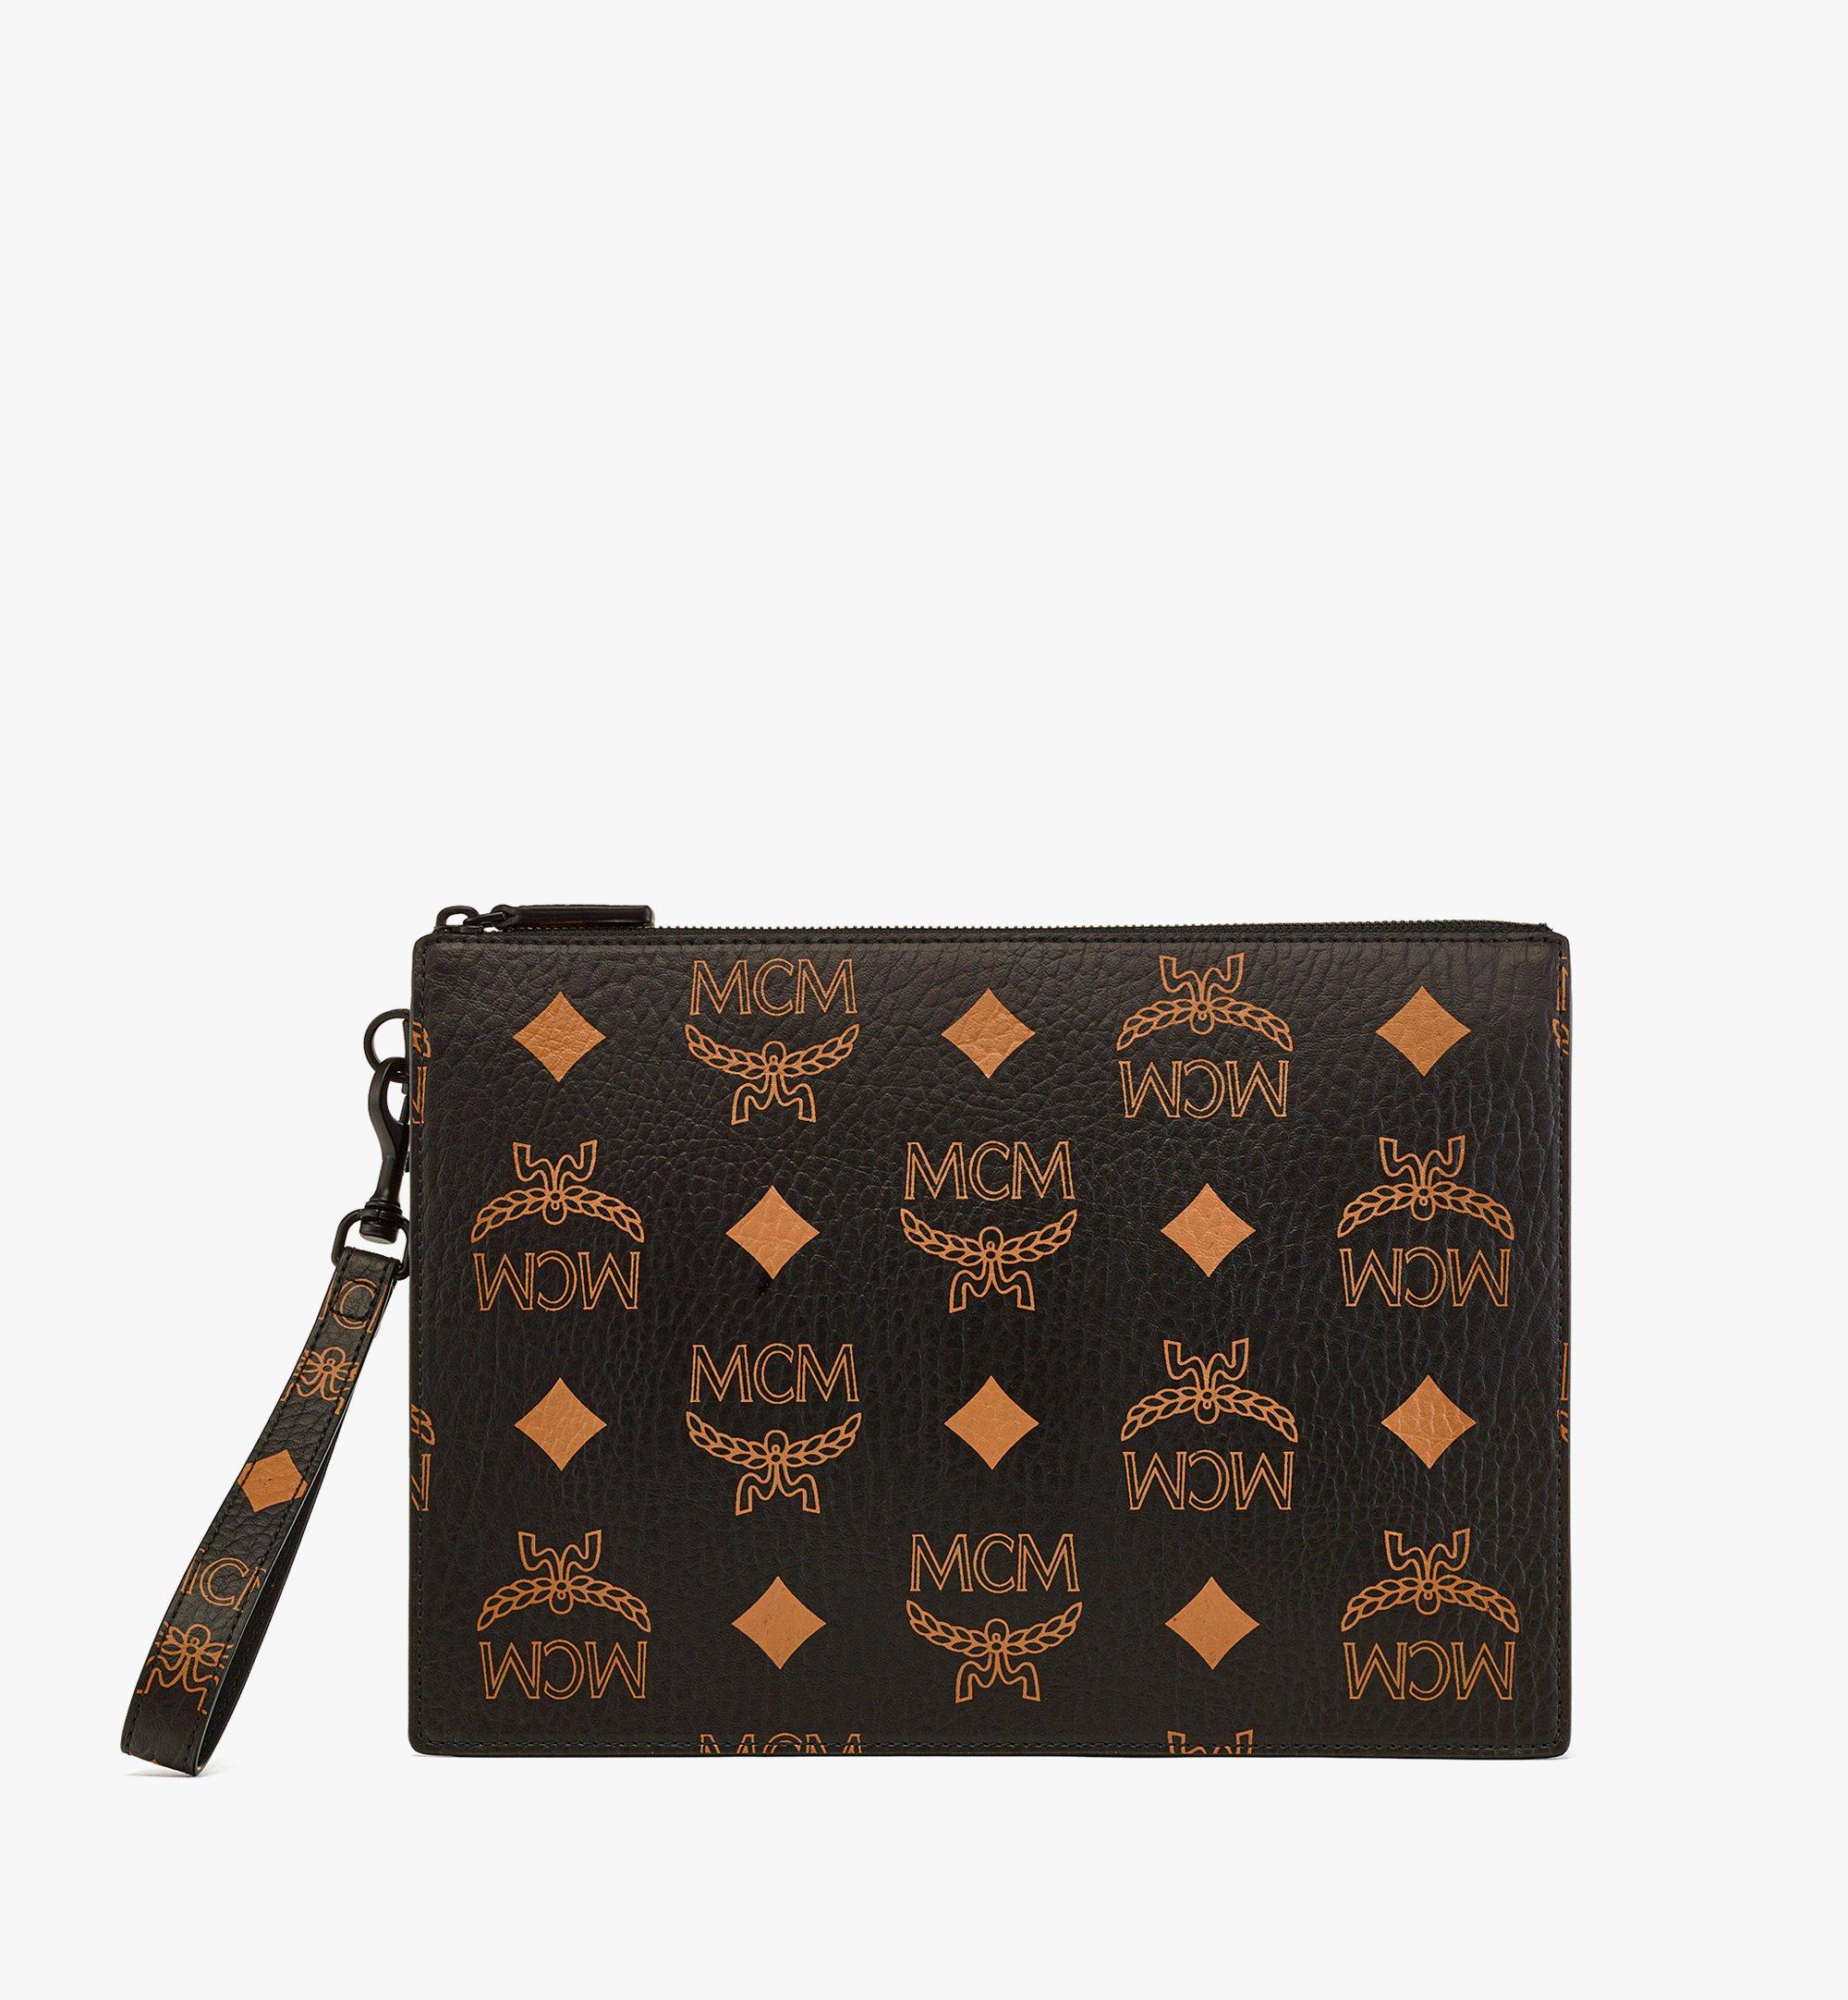 Designer Clutch Bags & Leather Crossbody Pouches